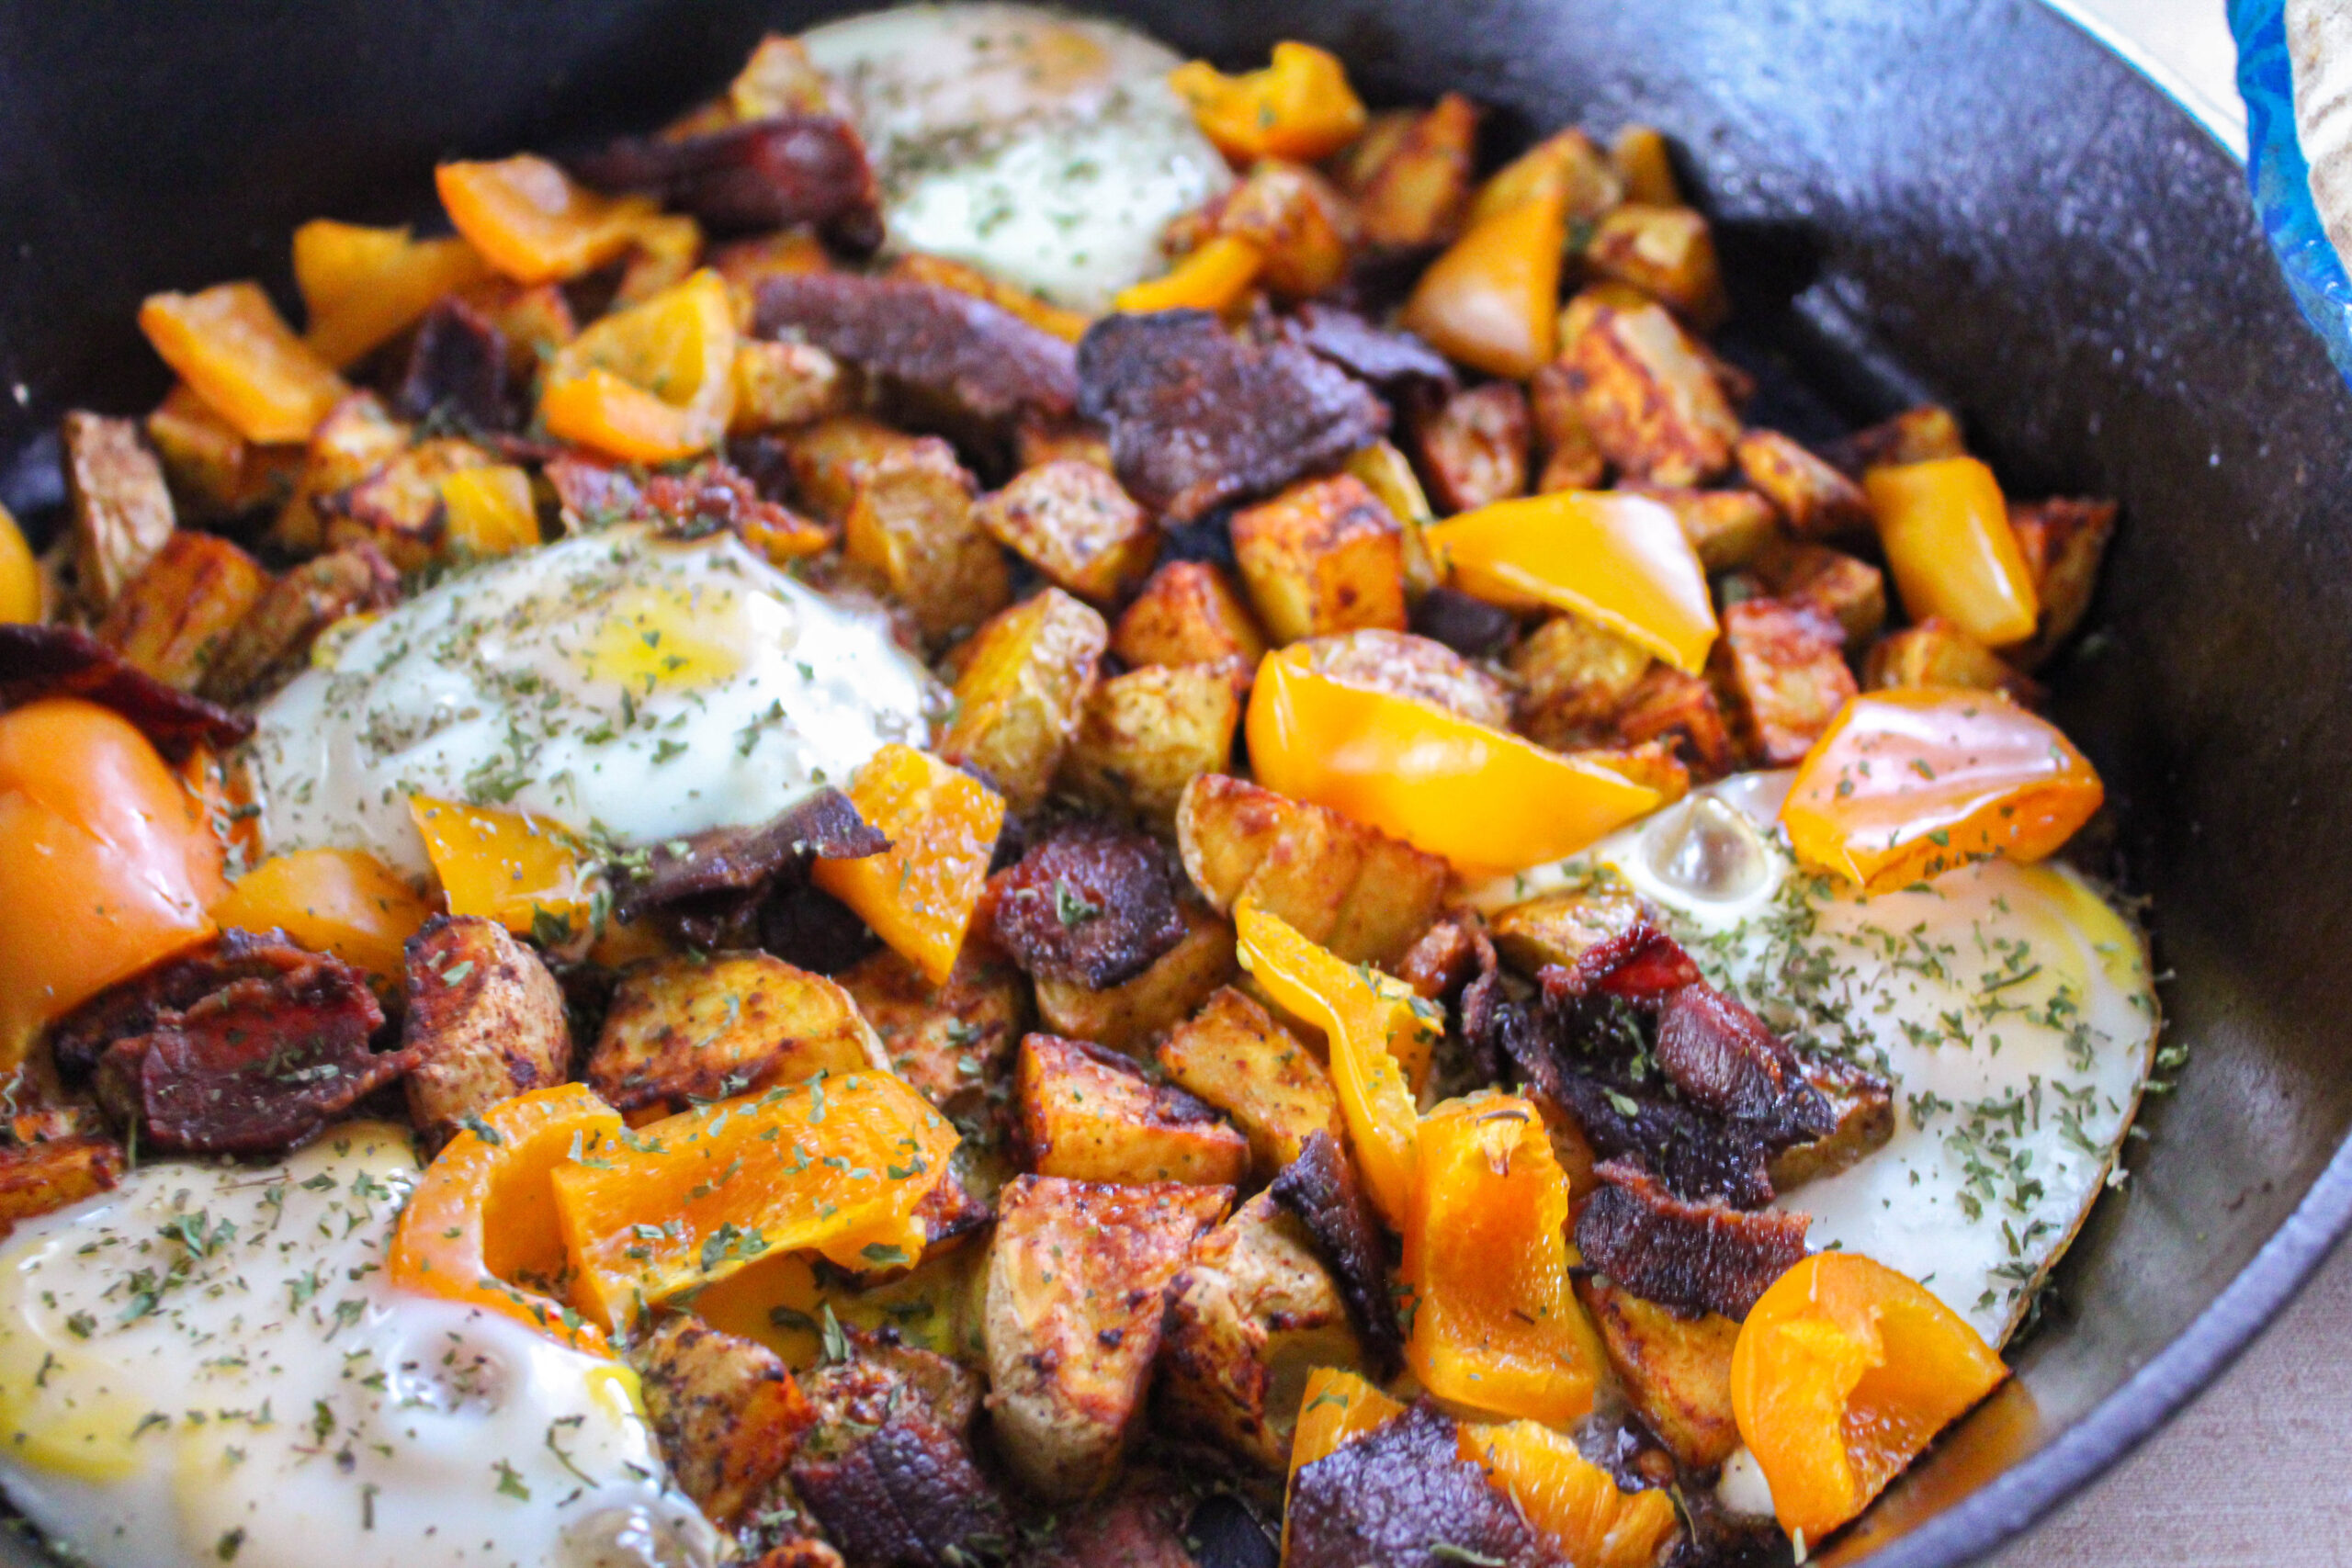 Sometimes you just need a hearty breakfast! My Simple Breakfast Skillet fits the bill! It's a Trim Healthy Mama Crossover and dairy-free